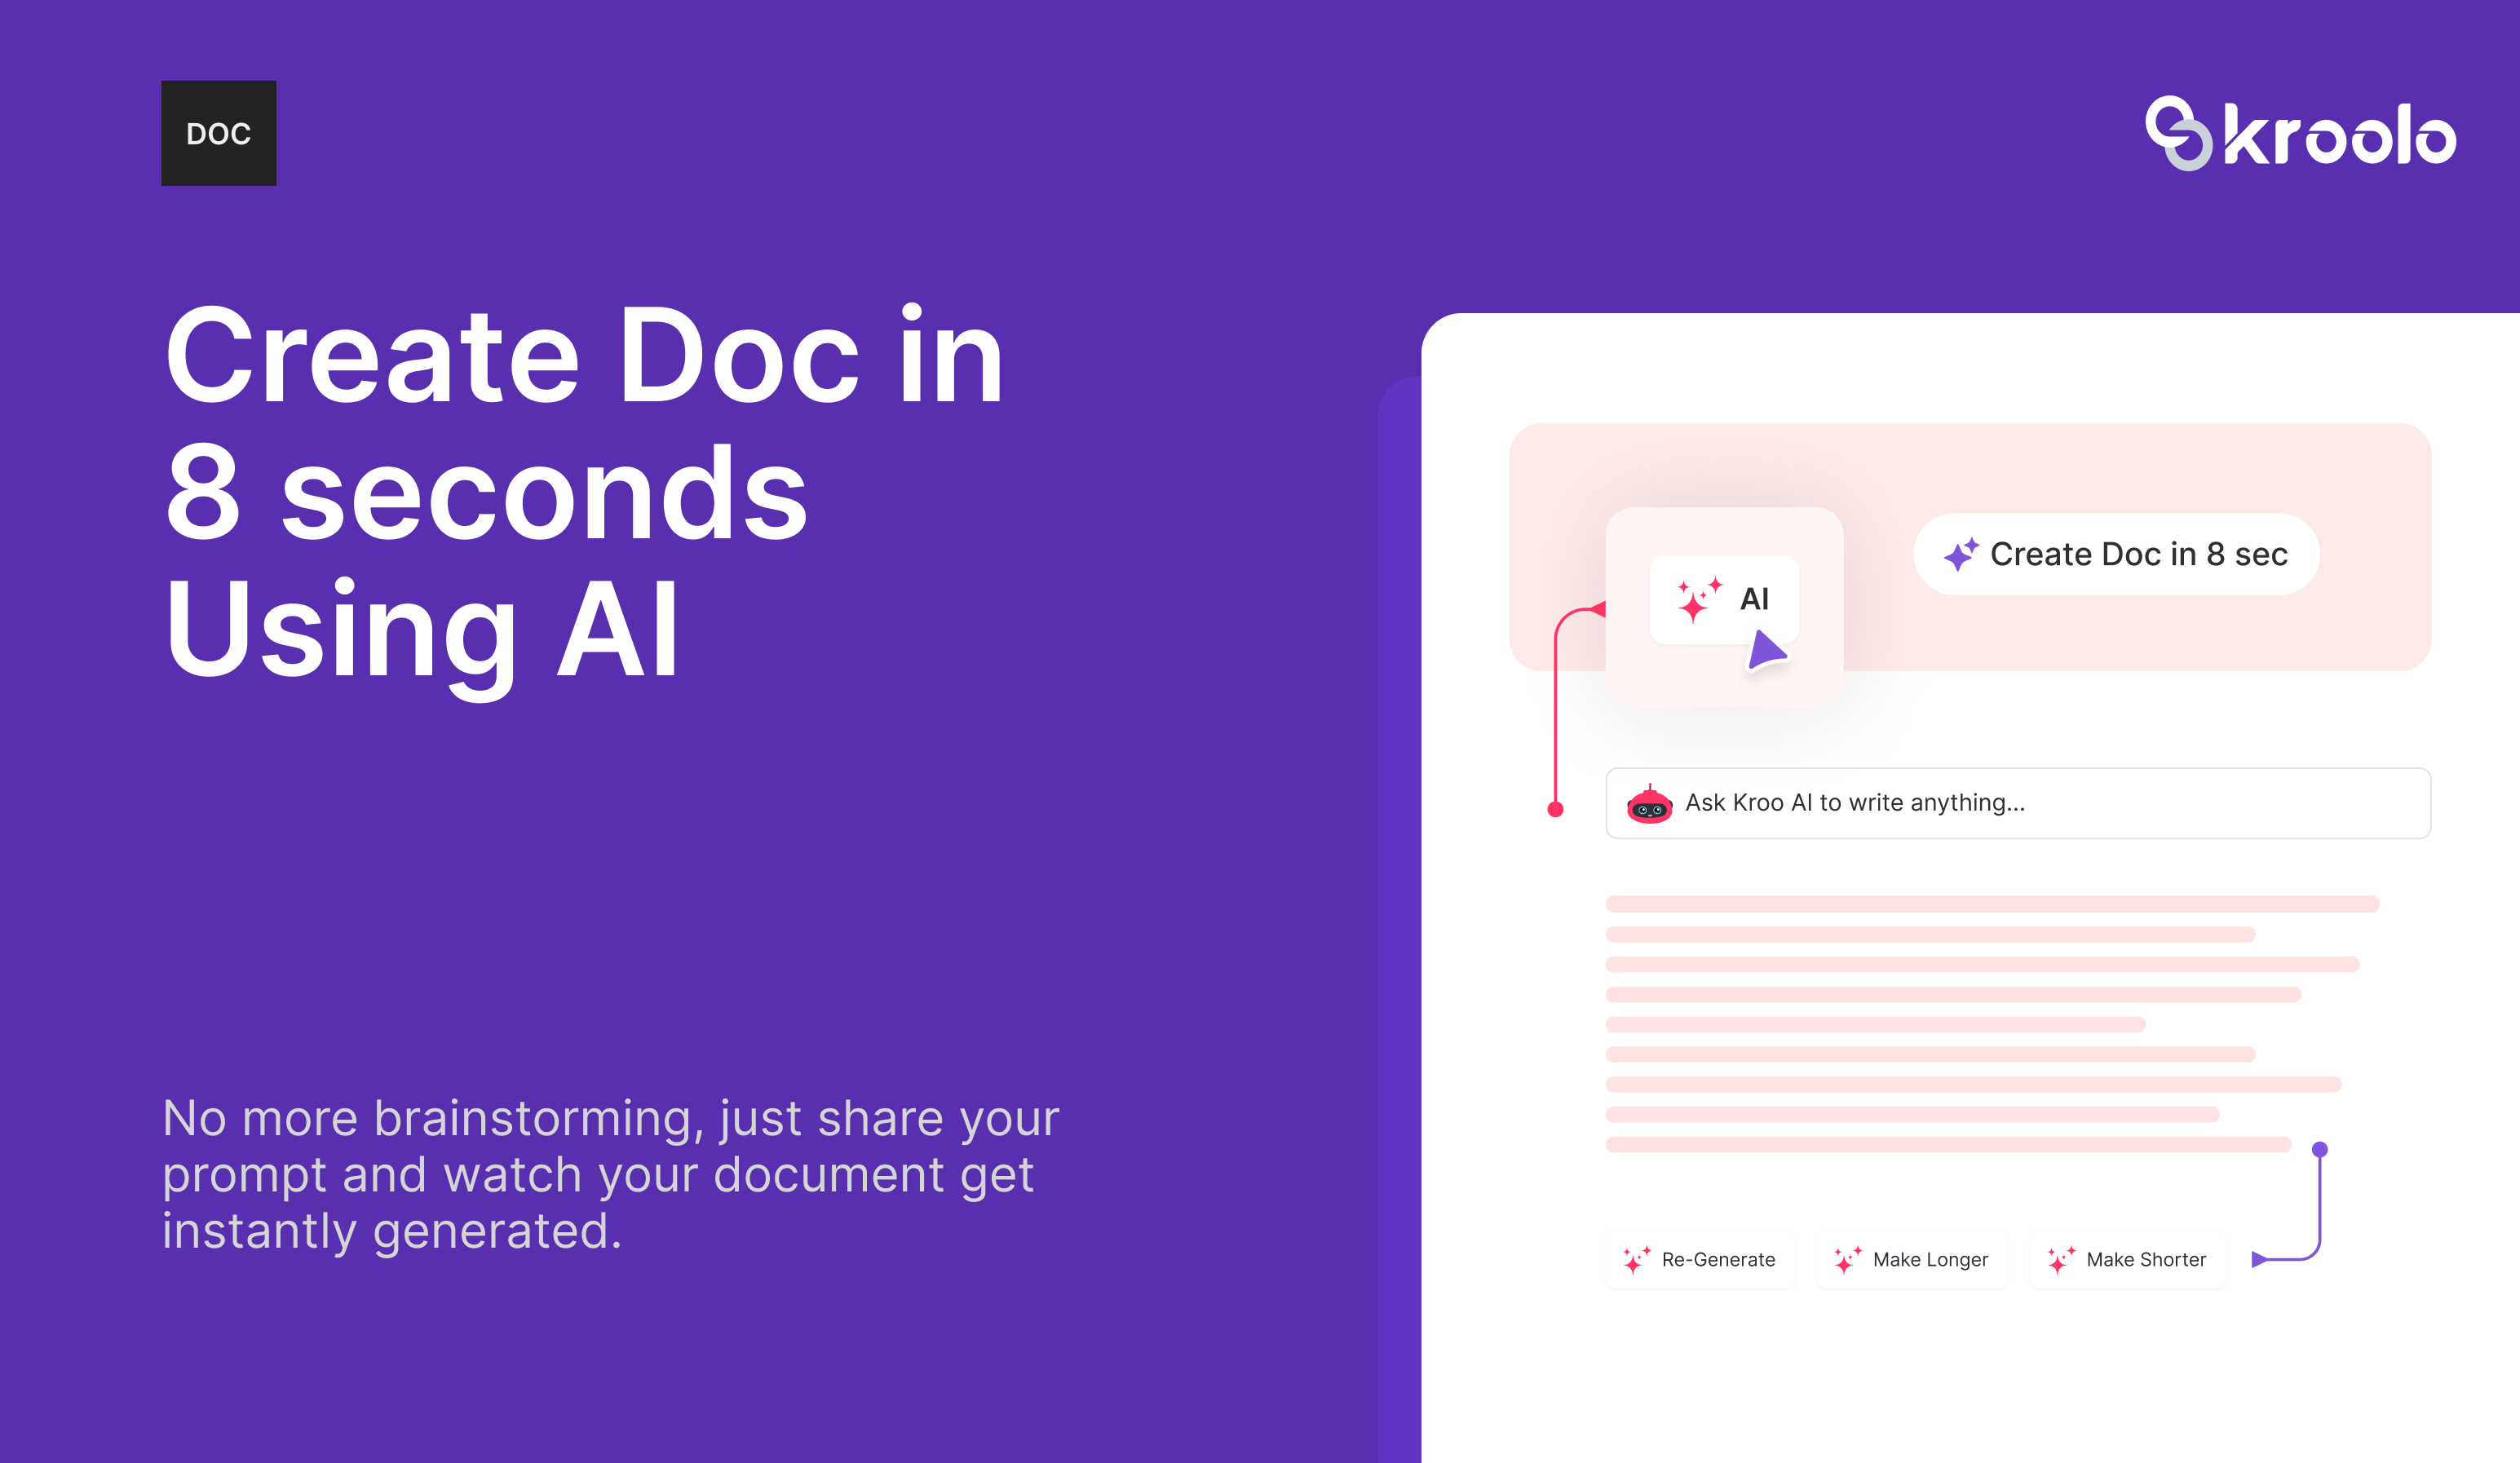 Documents - Create documents in less than 8 seconds with Kroolo. Docs can be instantly created, collaborated with teams. You can chat with the Doc to refine the contents.